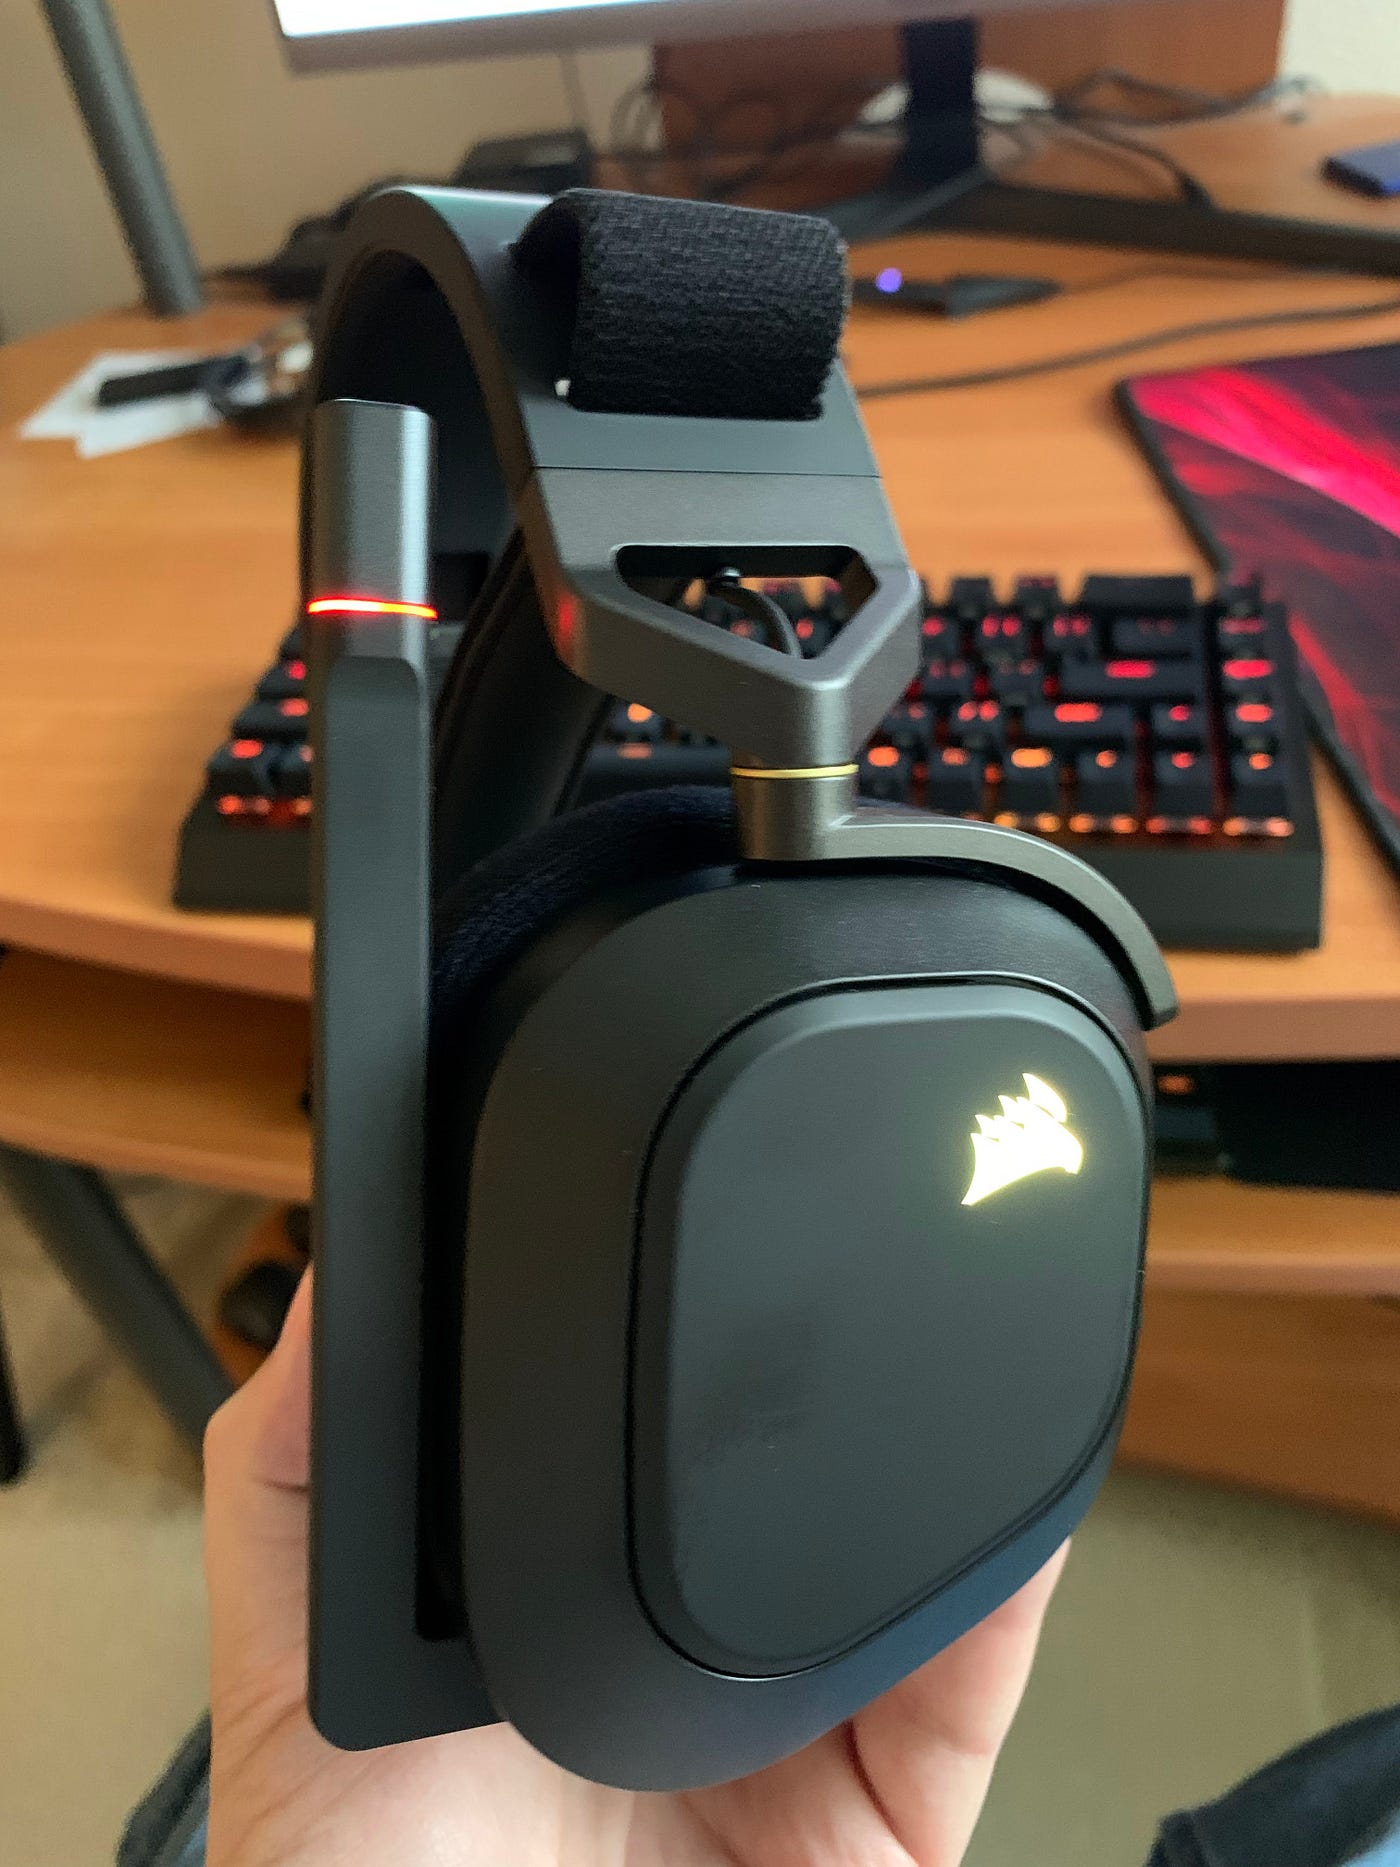 Corsair HS80 Wireless Gaming Headset Review, by Alex Rowe